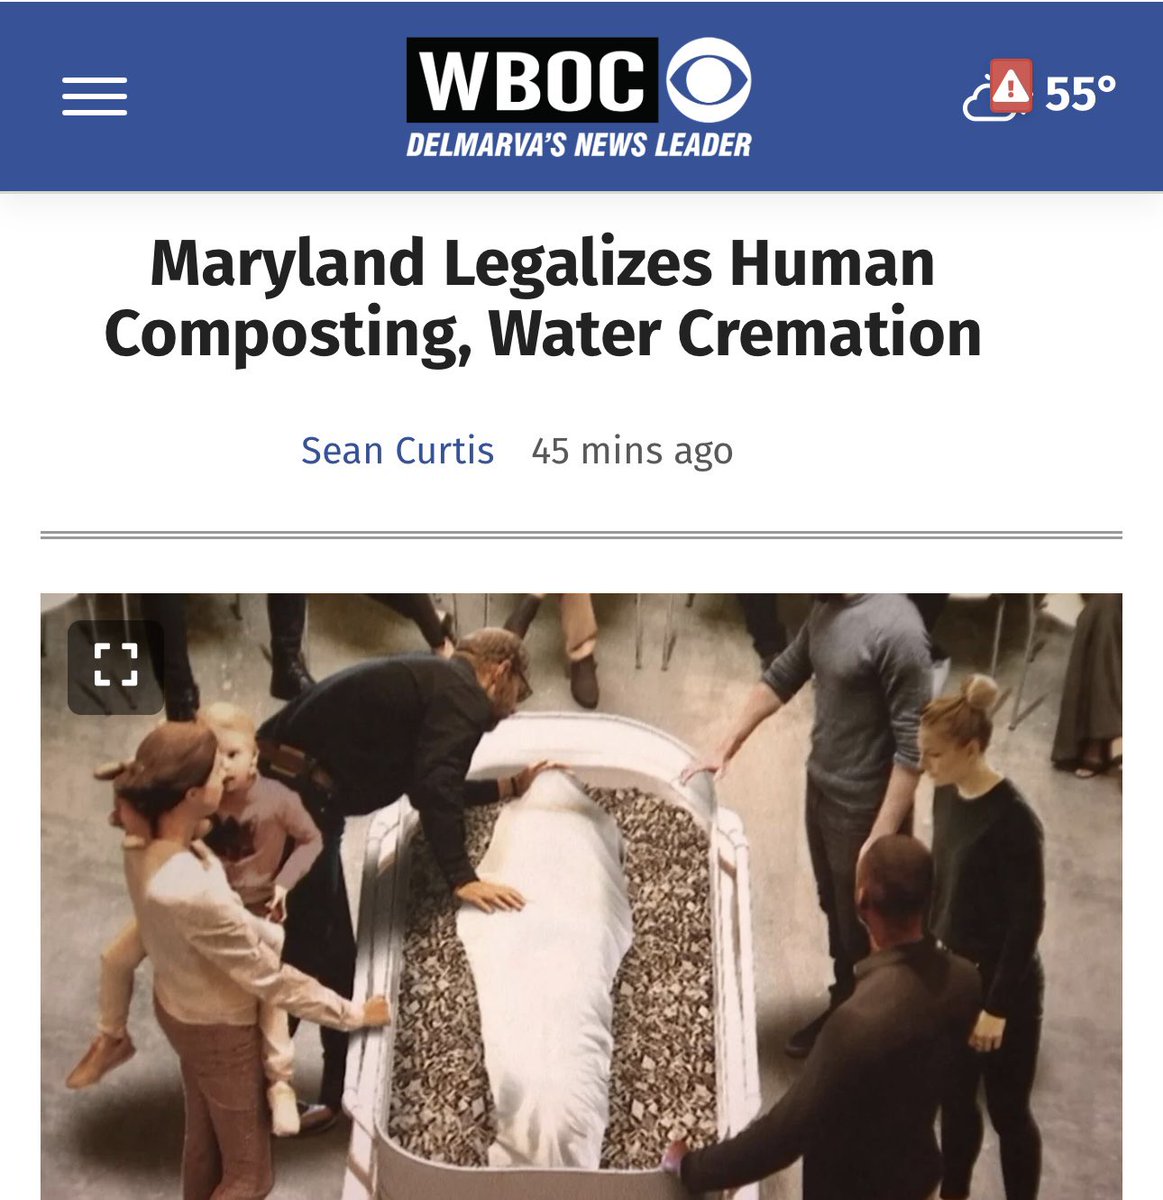 Yesterday Maryland Governor Wes Moore signed the green death care bill into law, legalizing both aquamation & human composting, and making Maryland the 9th state to legalize composting! wboc.com/news/maryland-…